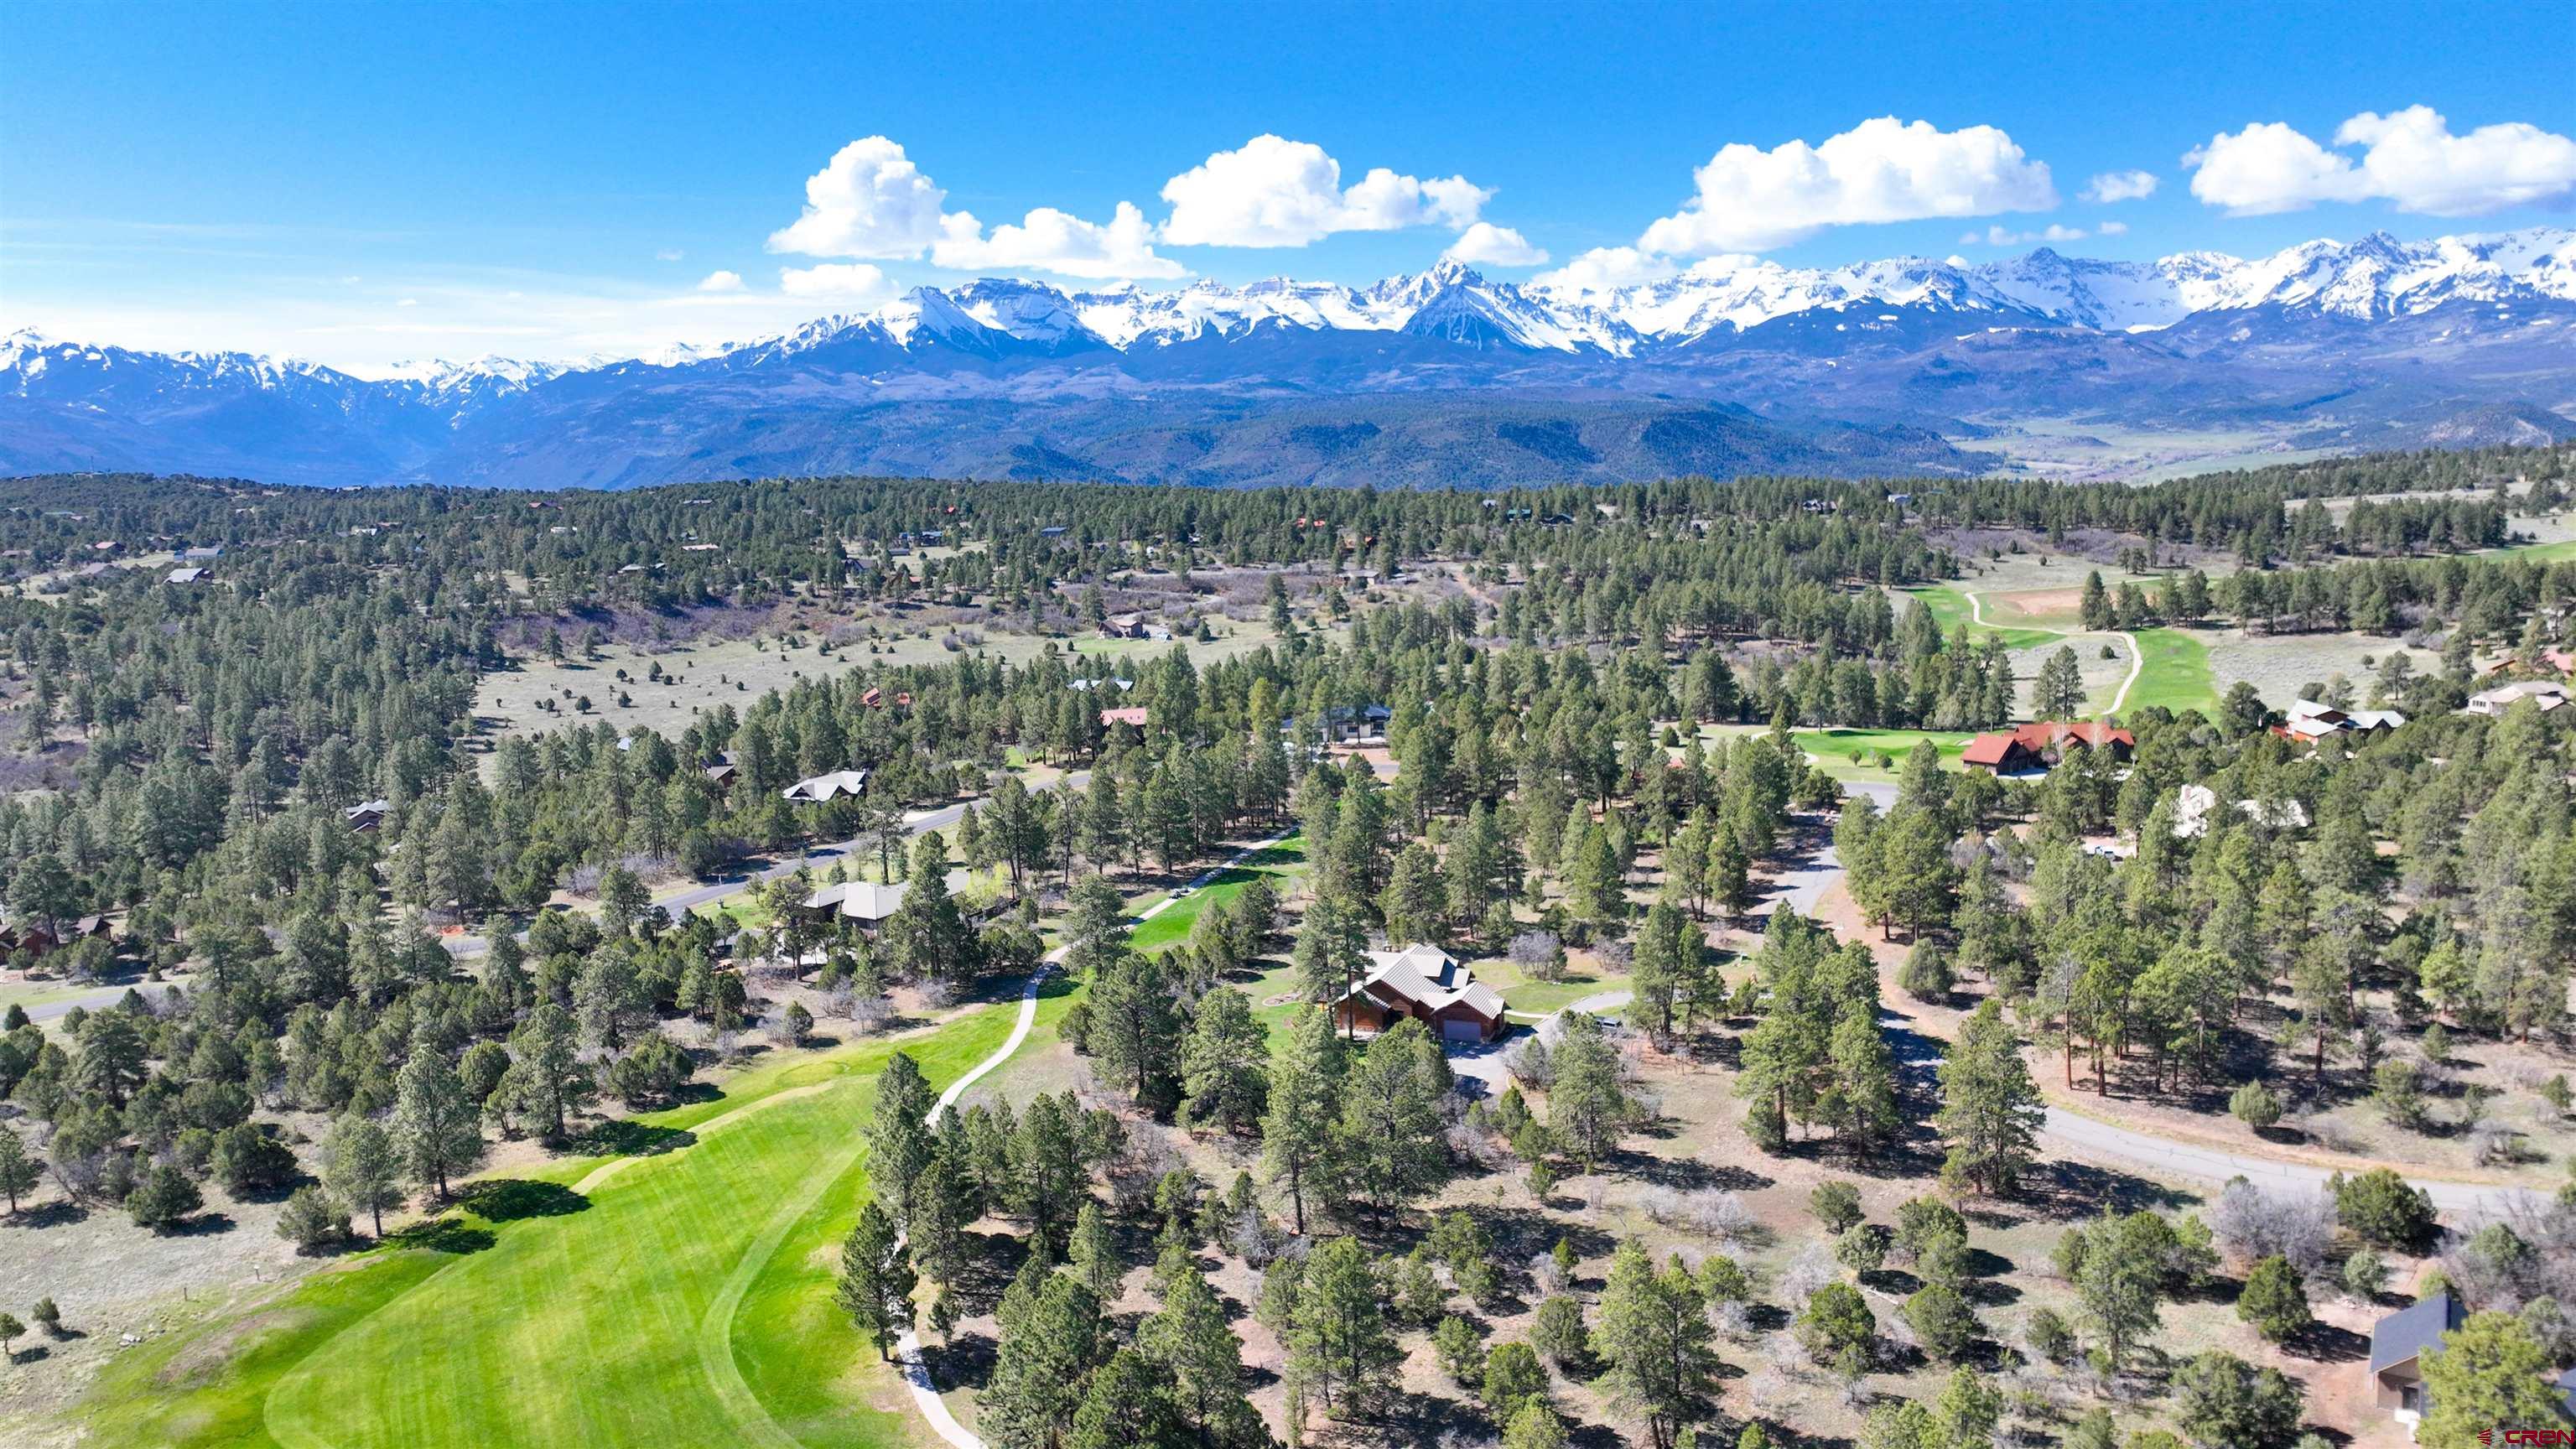 This lot, conveniently situated on the 7th Fairway at Divide Ranch & Club, offers ease of construction and immediate access to the golf course. Enjoy picturesque views of the Cimarron and Sneffels Ranges while deciding whether to admire the green or watch players . With the ability to step out of your door and onto the golf course, this presents an excellent opportunity to own a prime location within this breathtaking golf community.